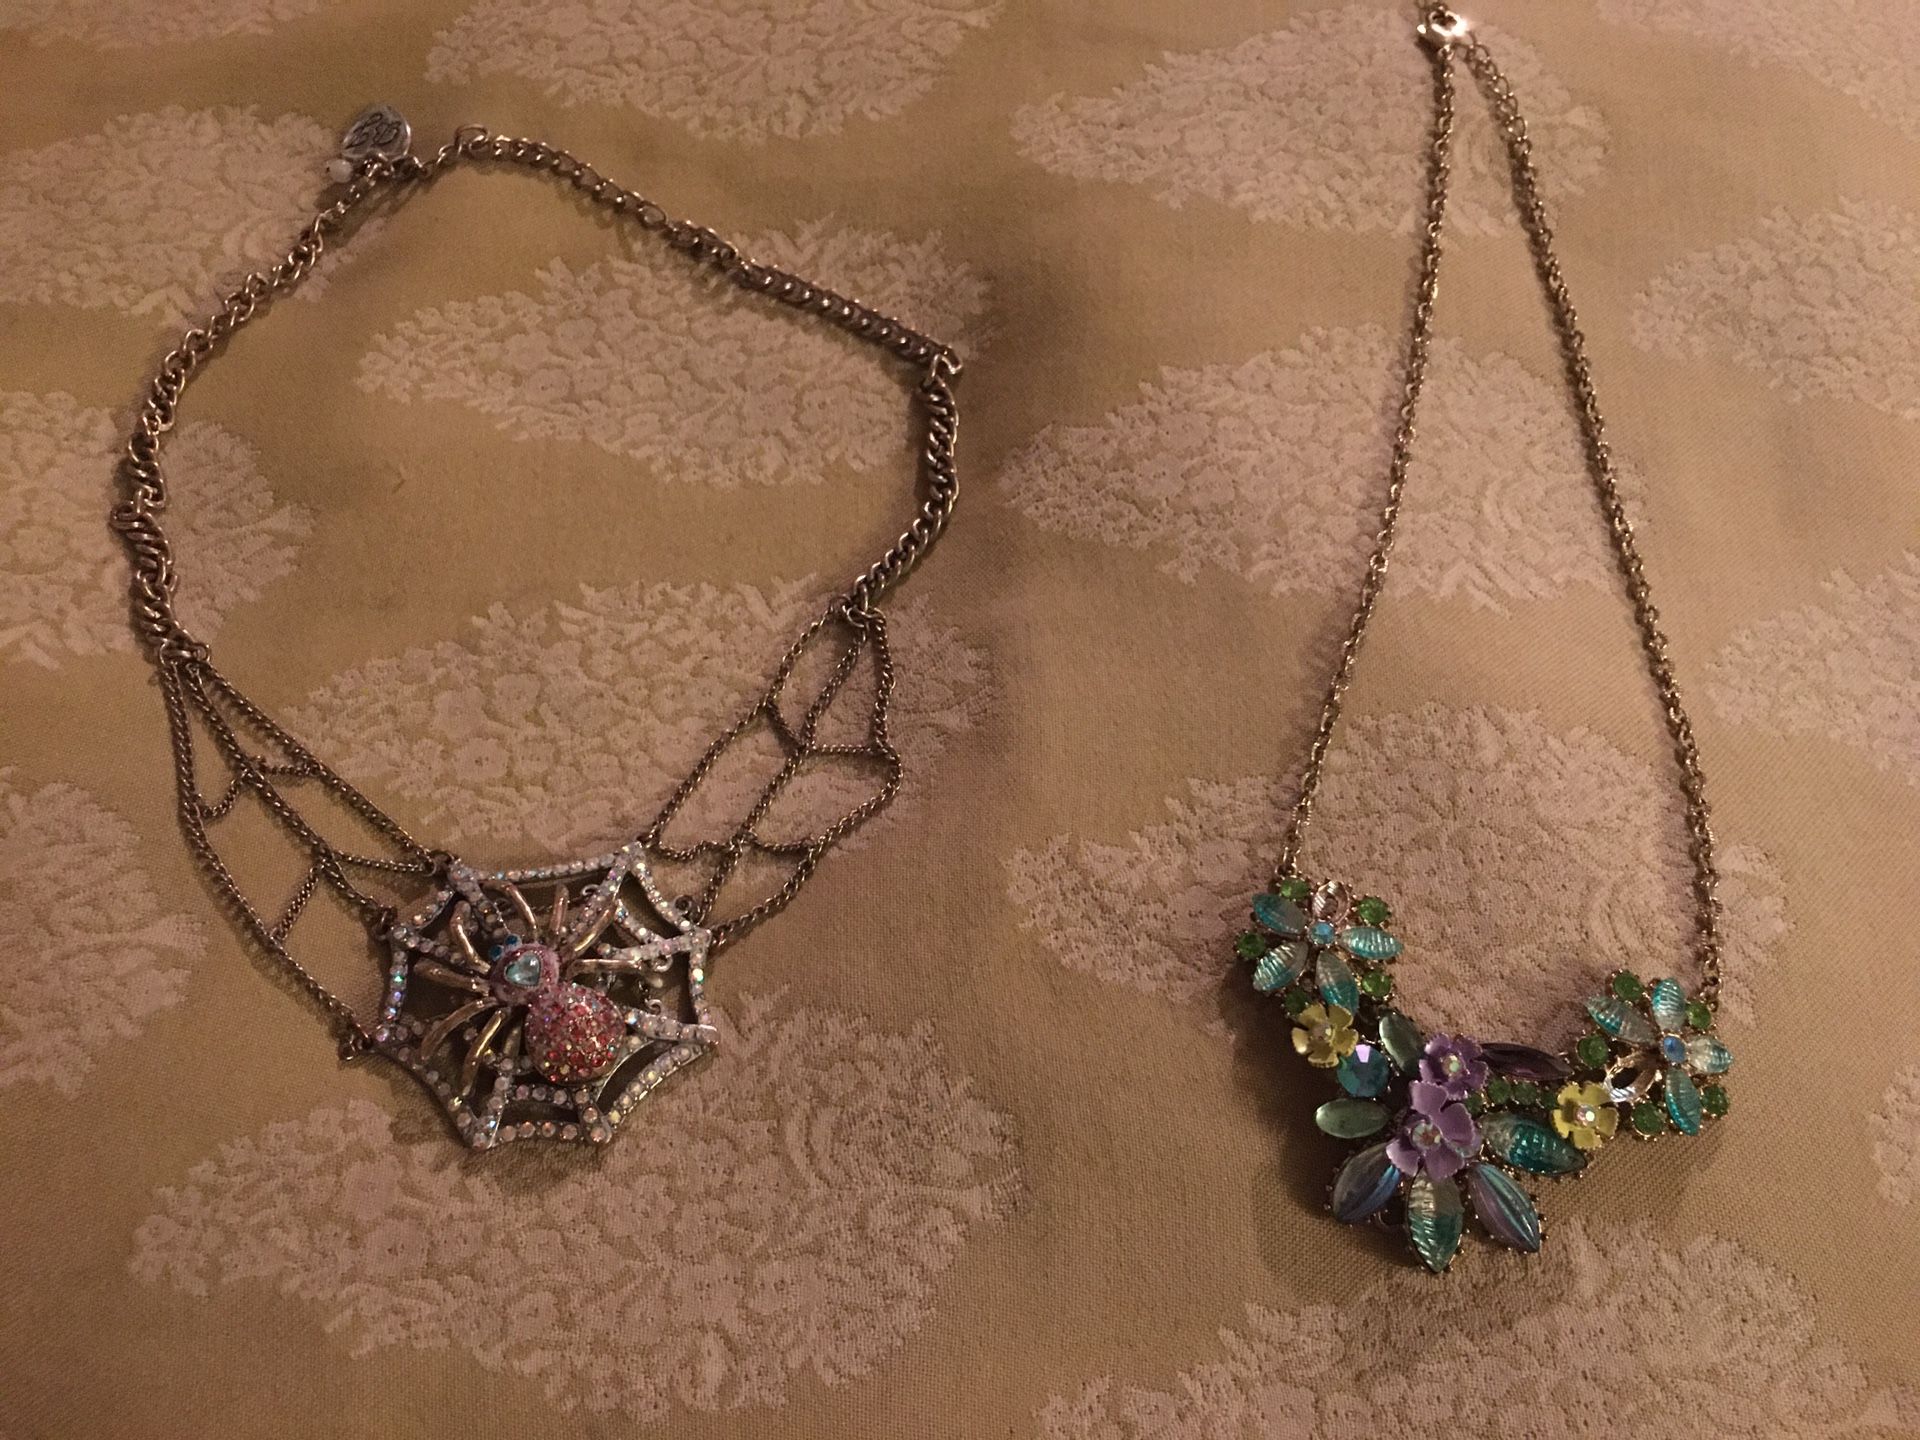 Beautiful necklaces!